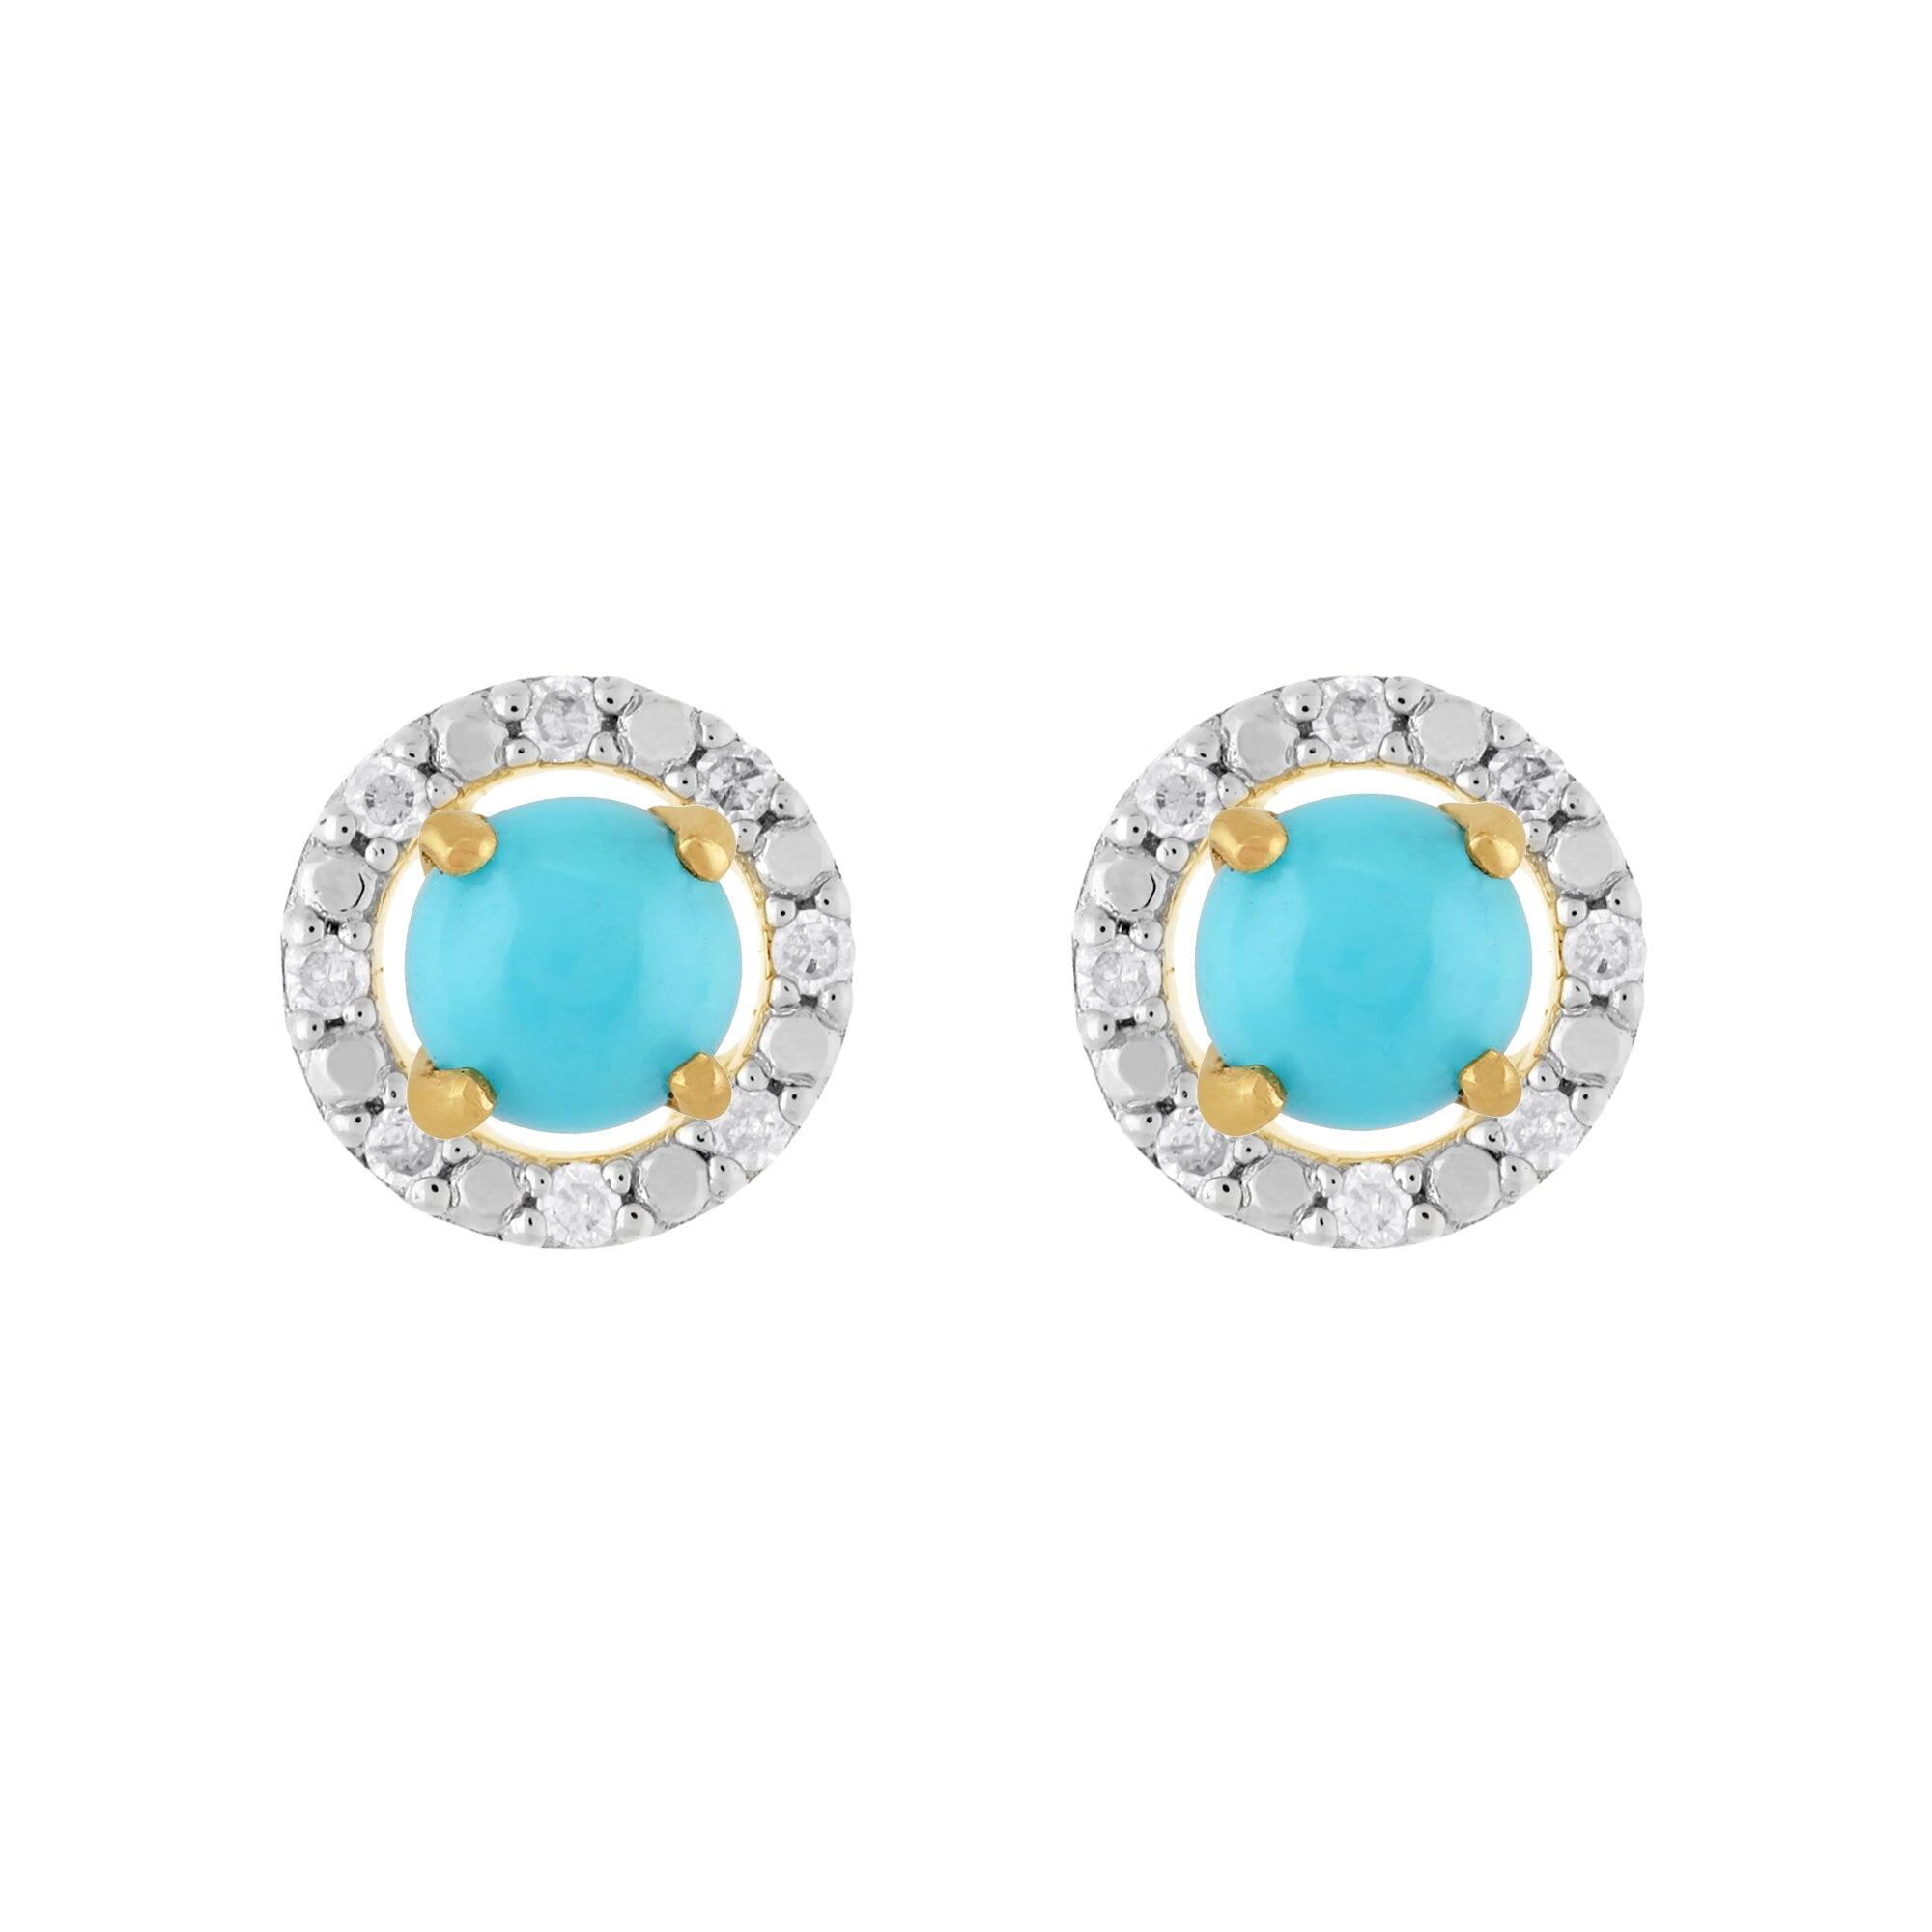 Classic Round Turquoise Stud Earrings with Detachable Diamond Round Earrings Jacket Set in 9ct Yellow Gold